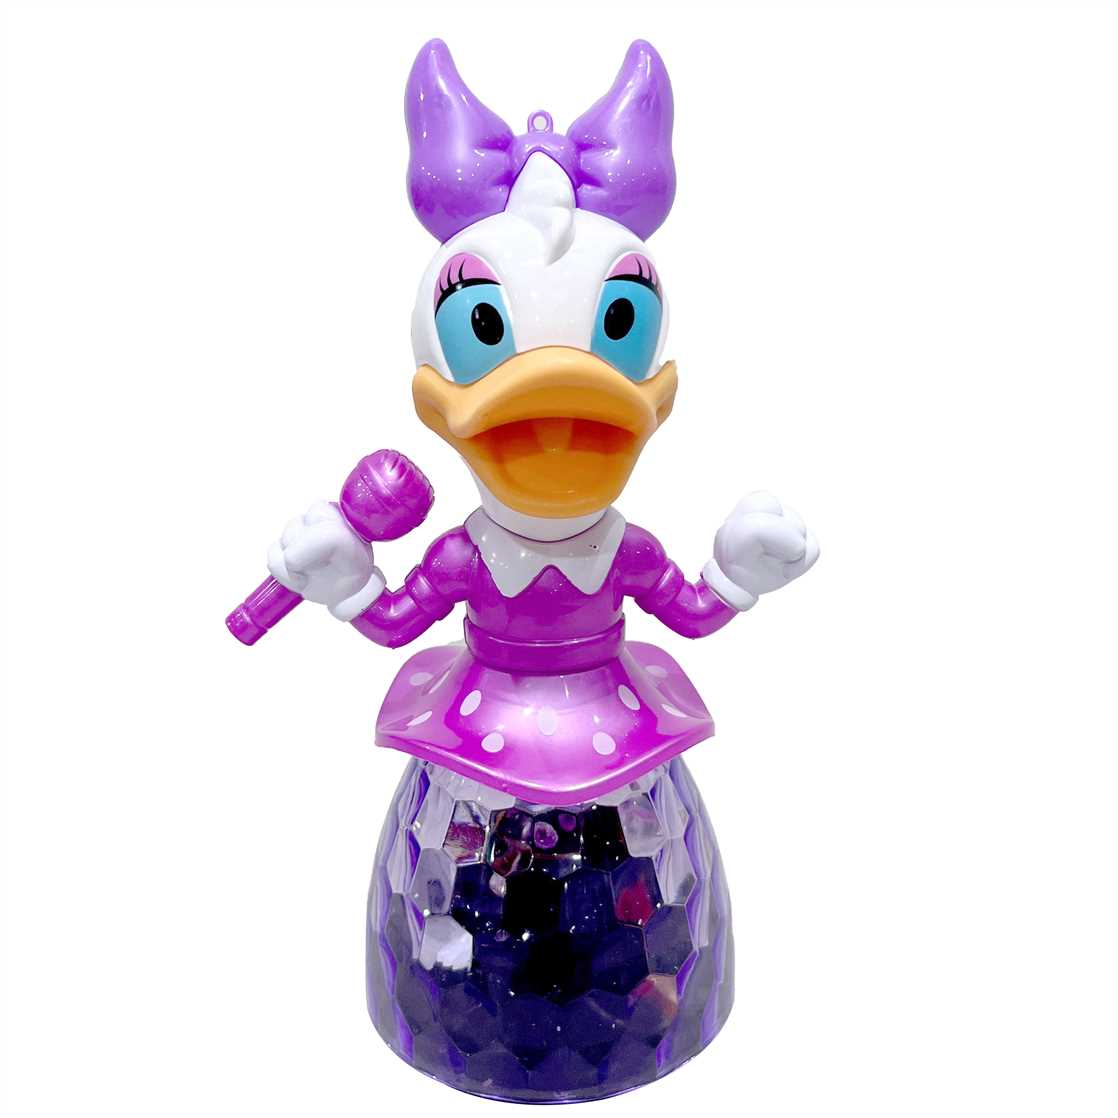 Buy Singing Daisy Duck Battery Operated Toy Online in India